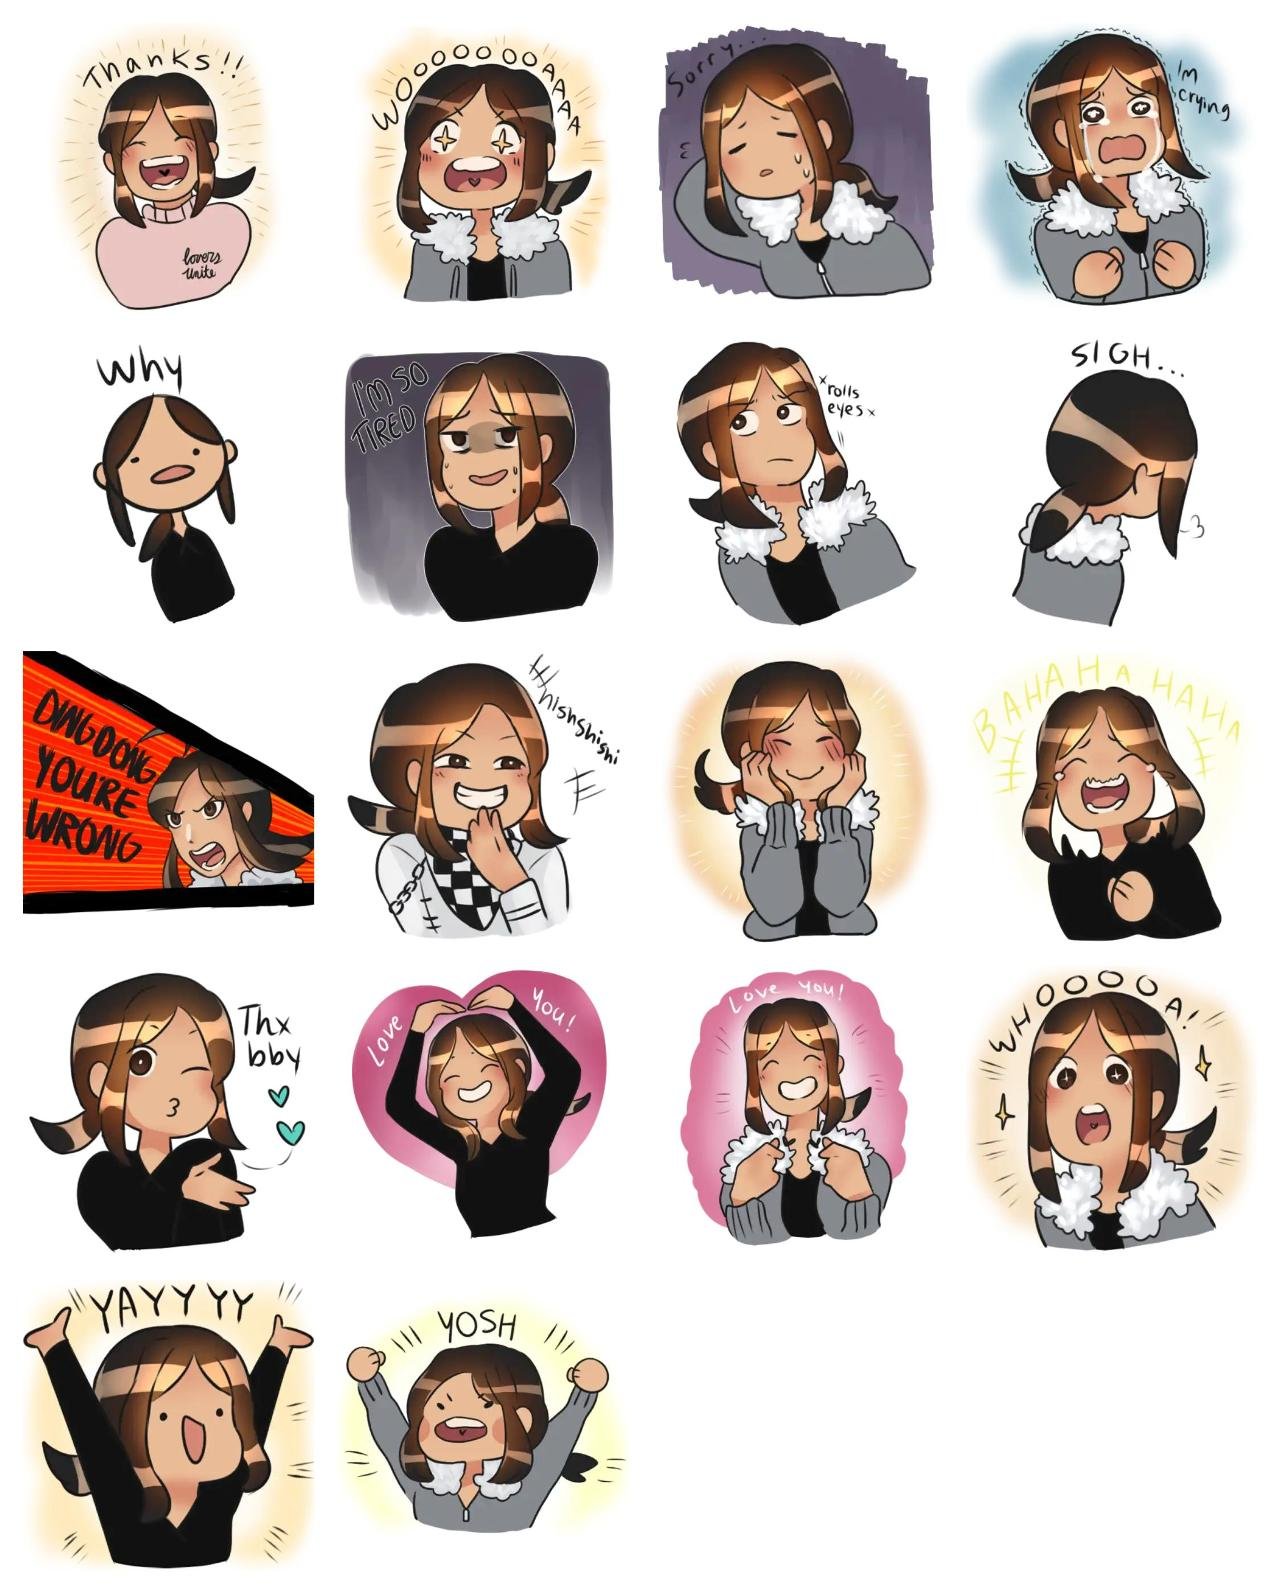 MEMEME2 Animation/Cartoon sticker pack for Whatsapp, Telegram, Signal, and others chatting and message apps